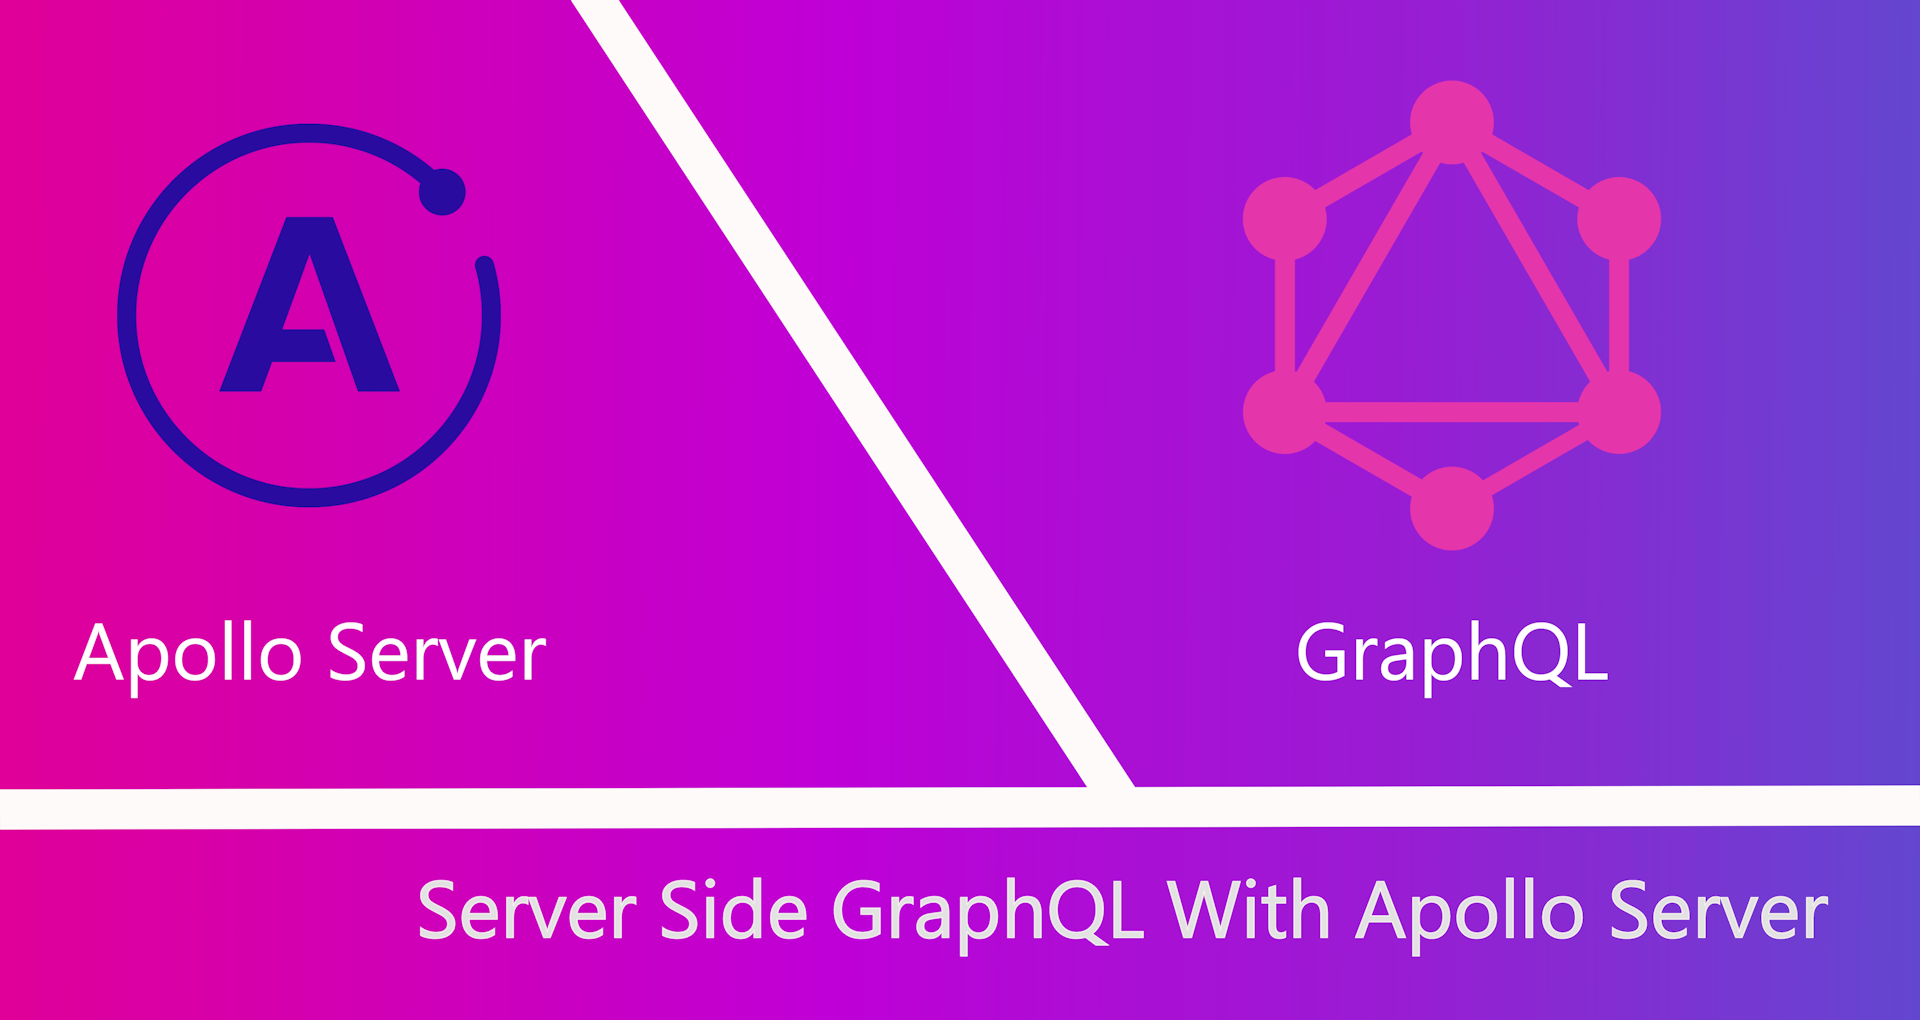 Setting up an Apollo Server to handle GraphQL requests